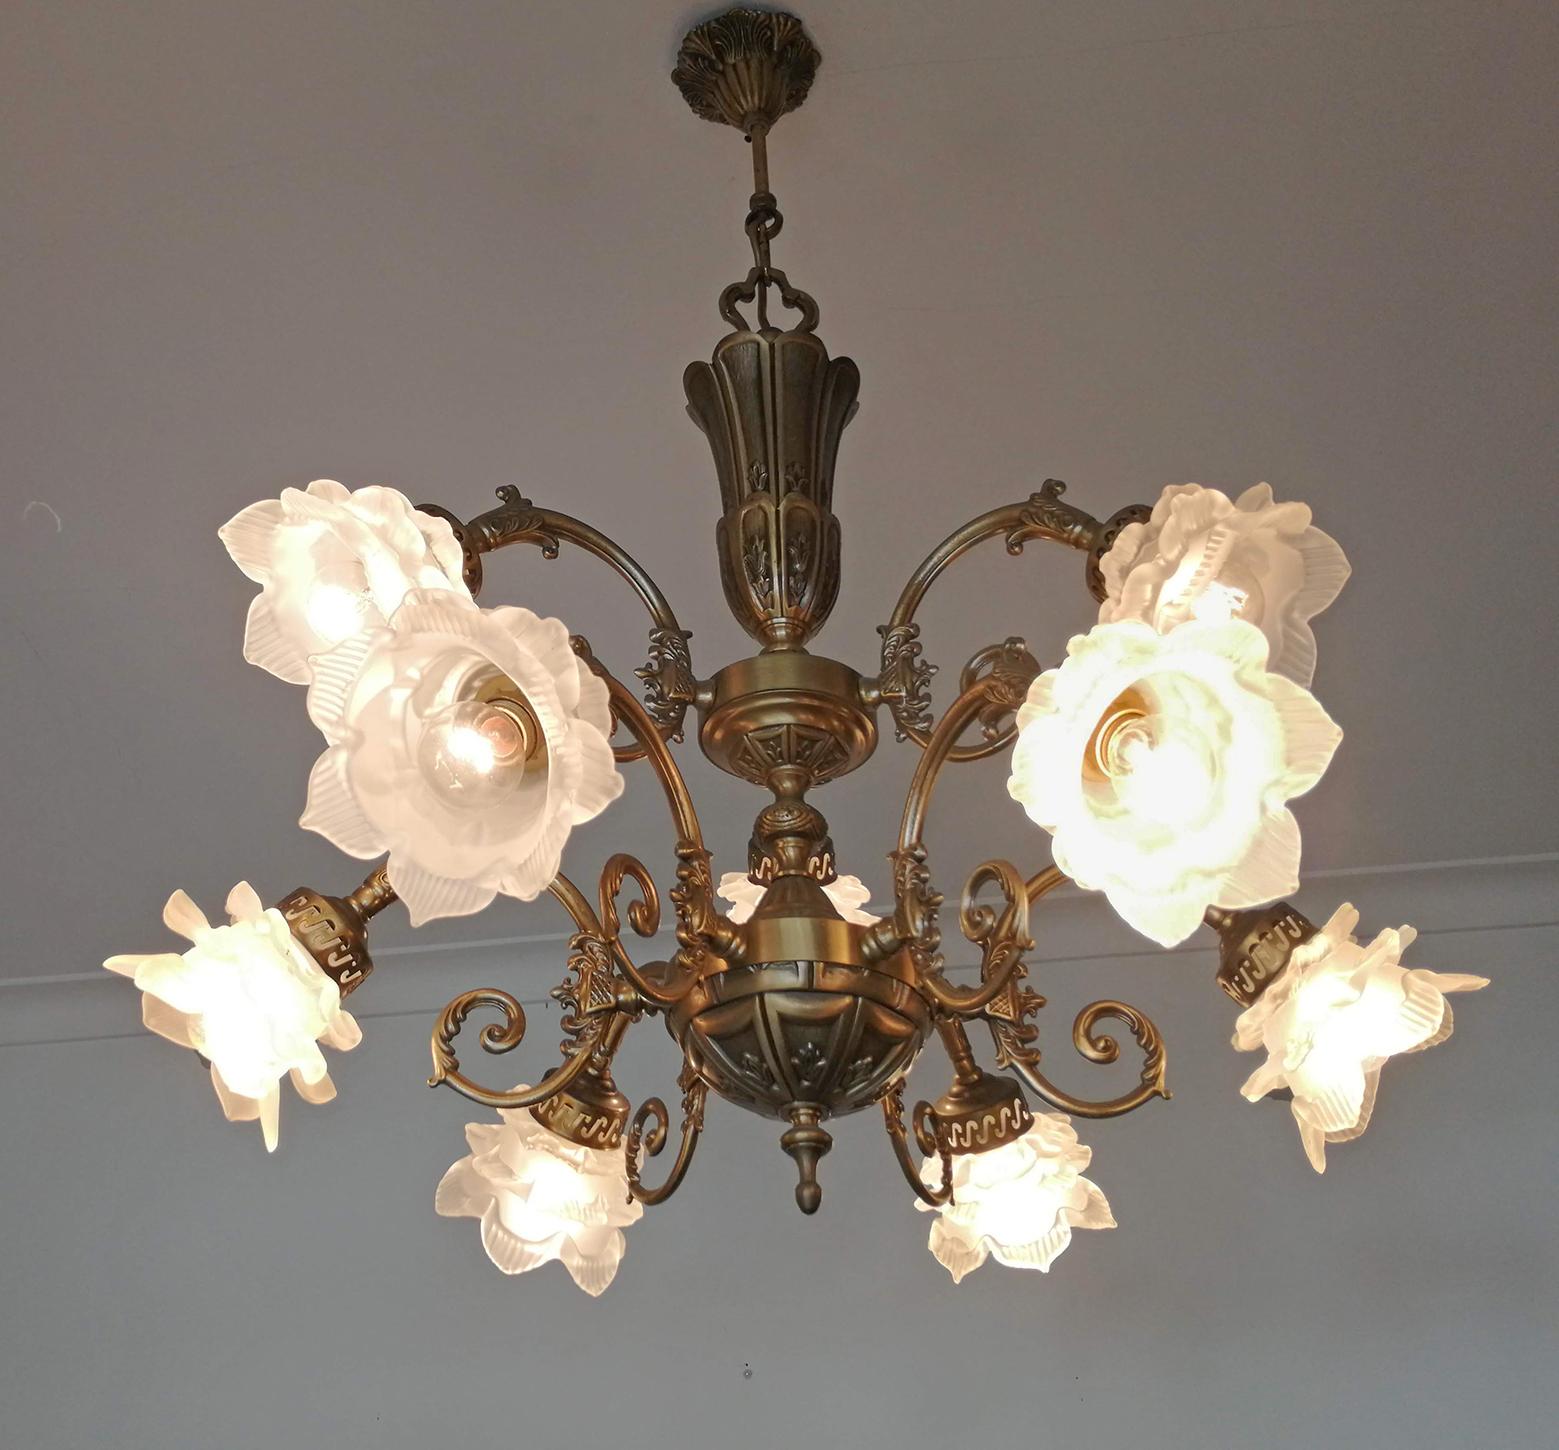 French Art Nouveau or Art Deco Art Glass Flower & Gilt Brass 9-Light Chandelier In Good Condition For Sale In Coimbra, PT